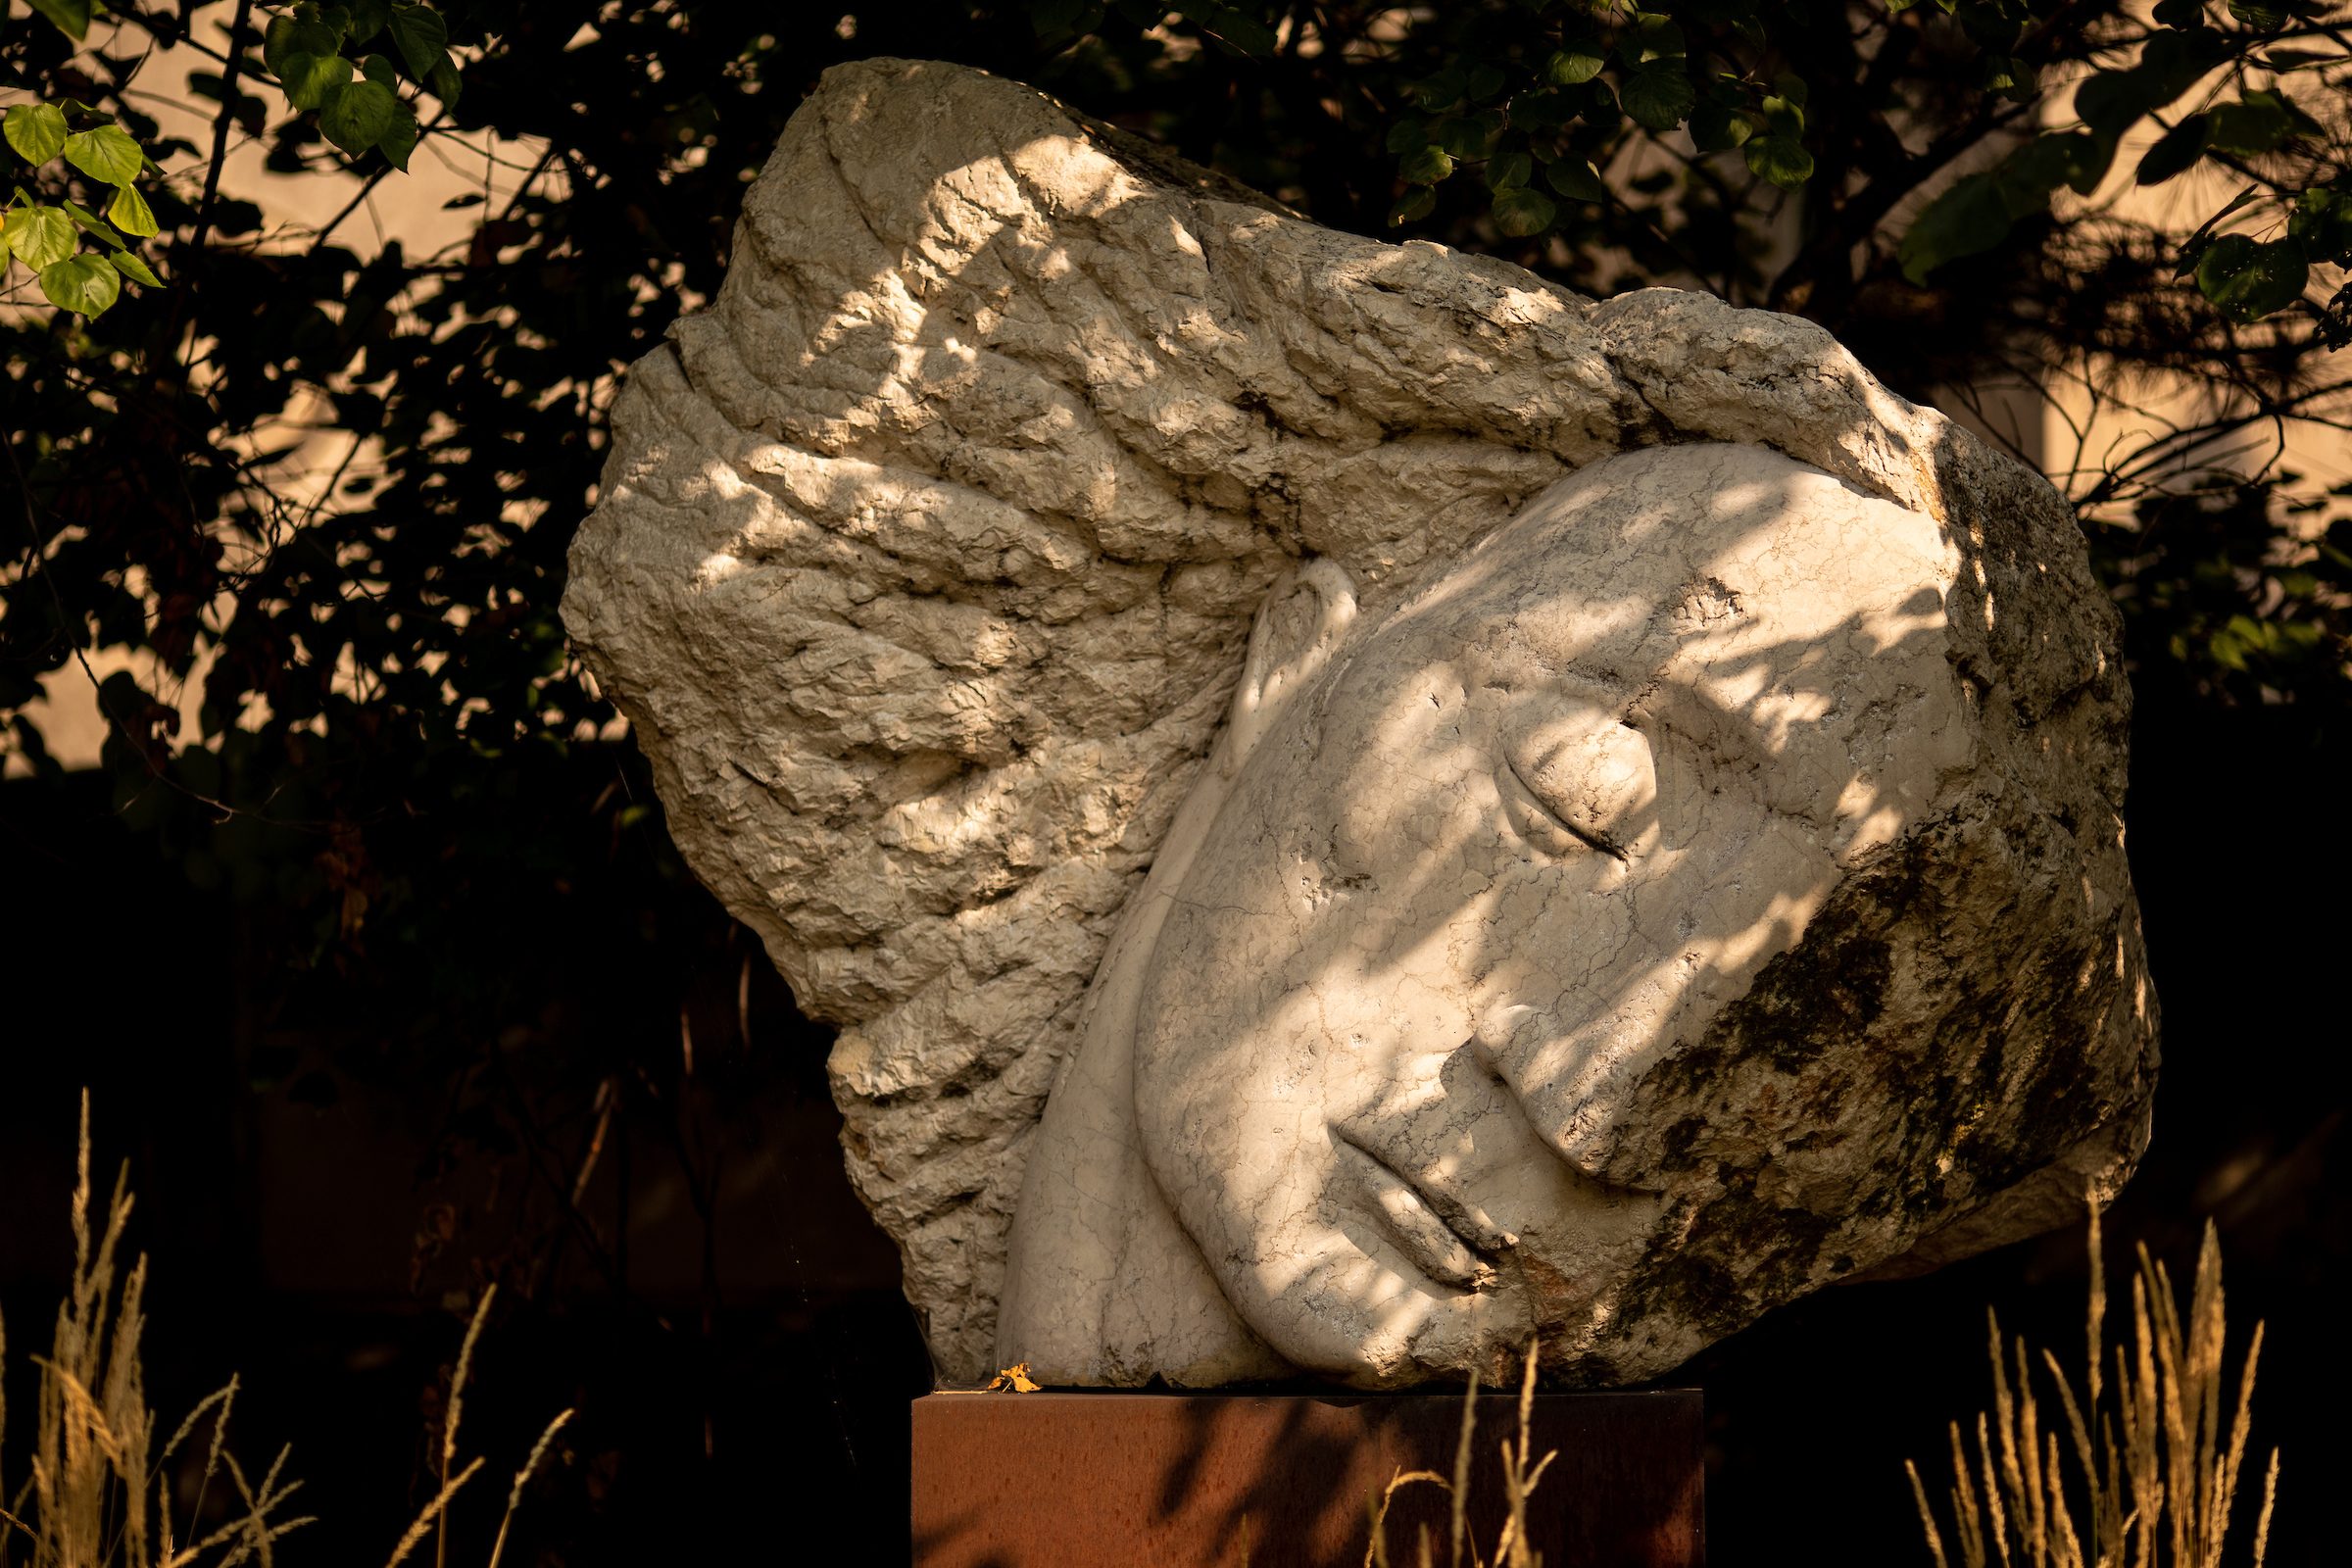 Wounded Angel sculpture on the Lake Shore Campus, September 16, 2020. (Photo: Lukas Keapproth)